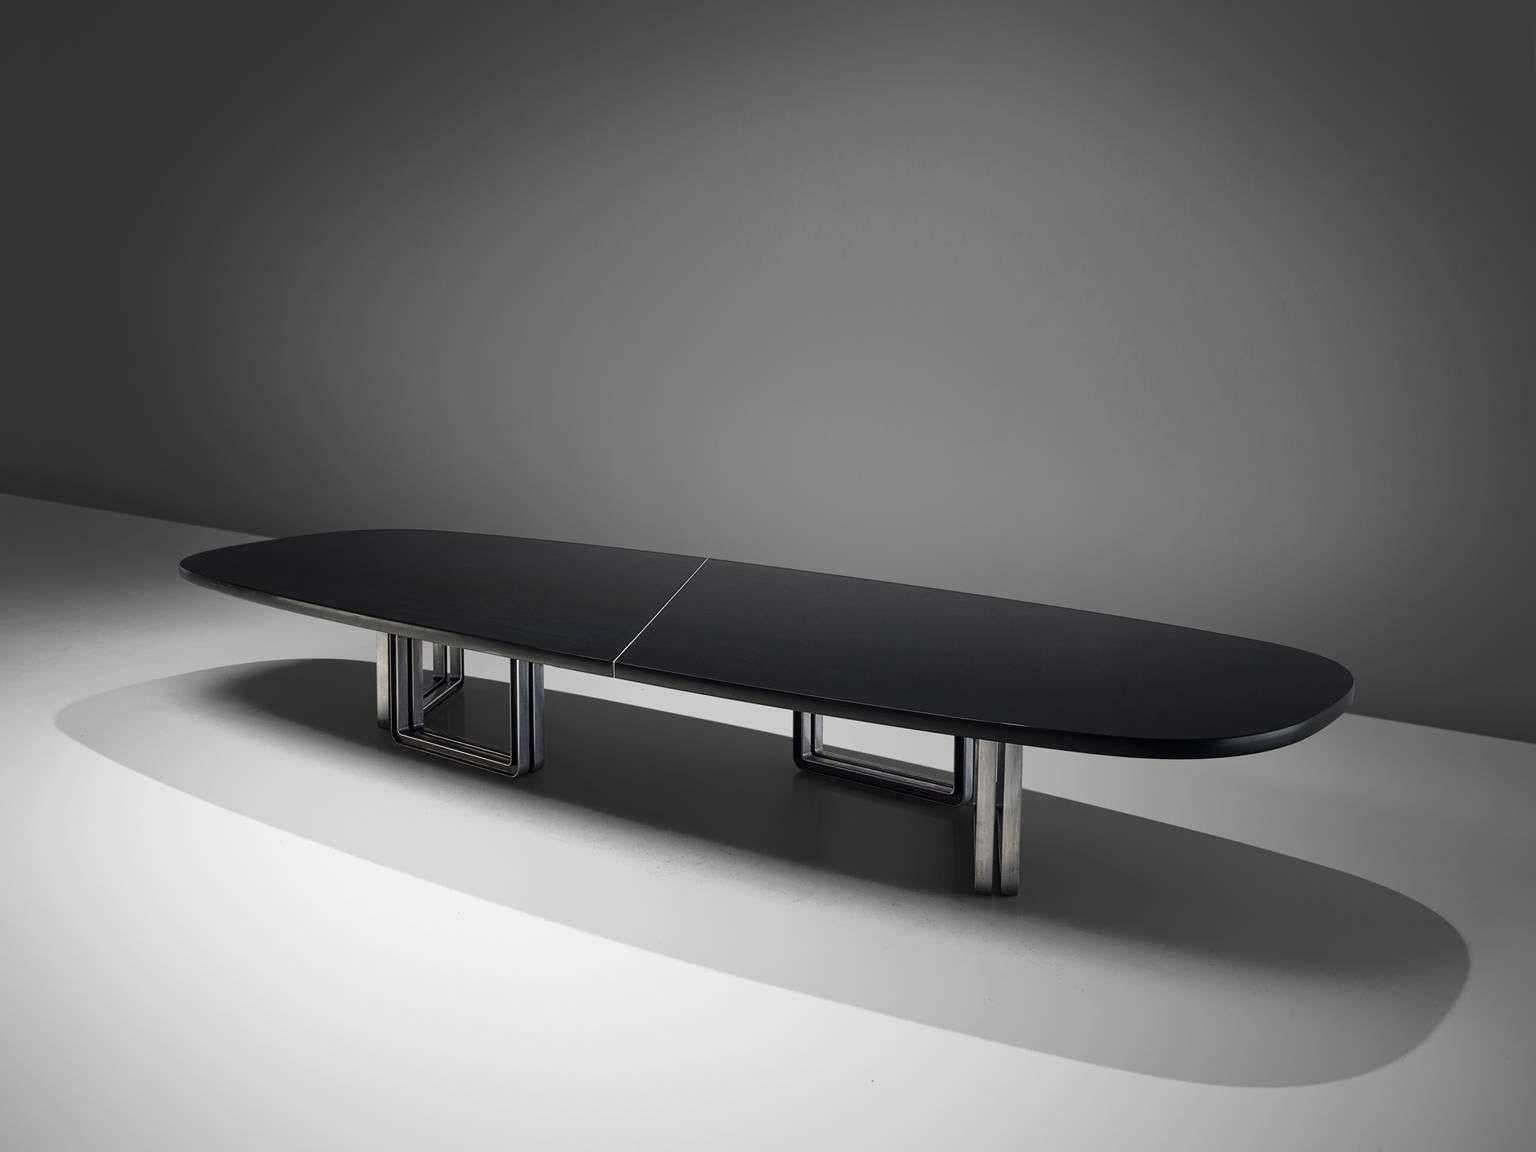 Tecno Design Centre for Tecno, lacquered black wood and aluminum base, conference table 335a, Italy, 1975-1978.

Large oversized conference table with a black top. The table is composed of two black pieces connected via steel inserts and mounted